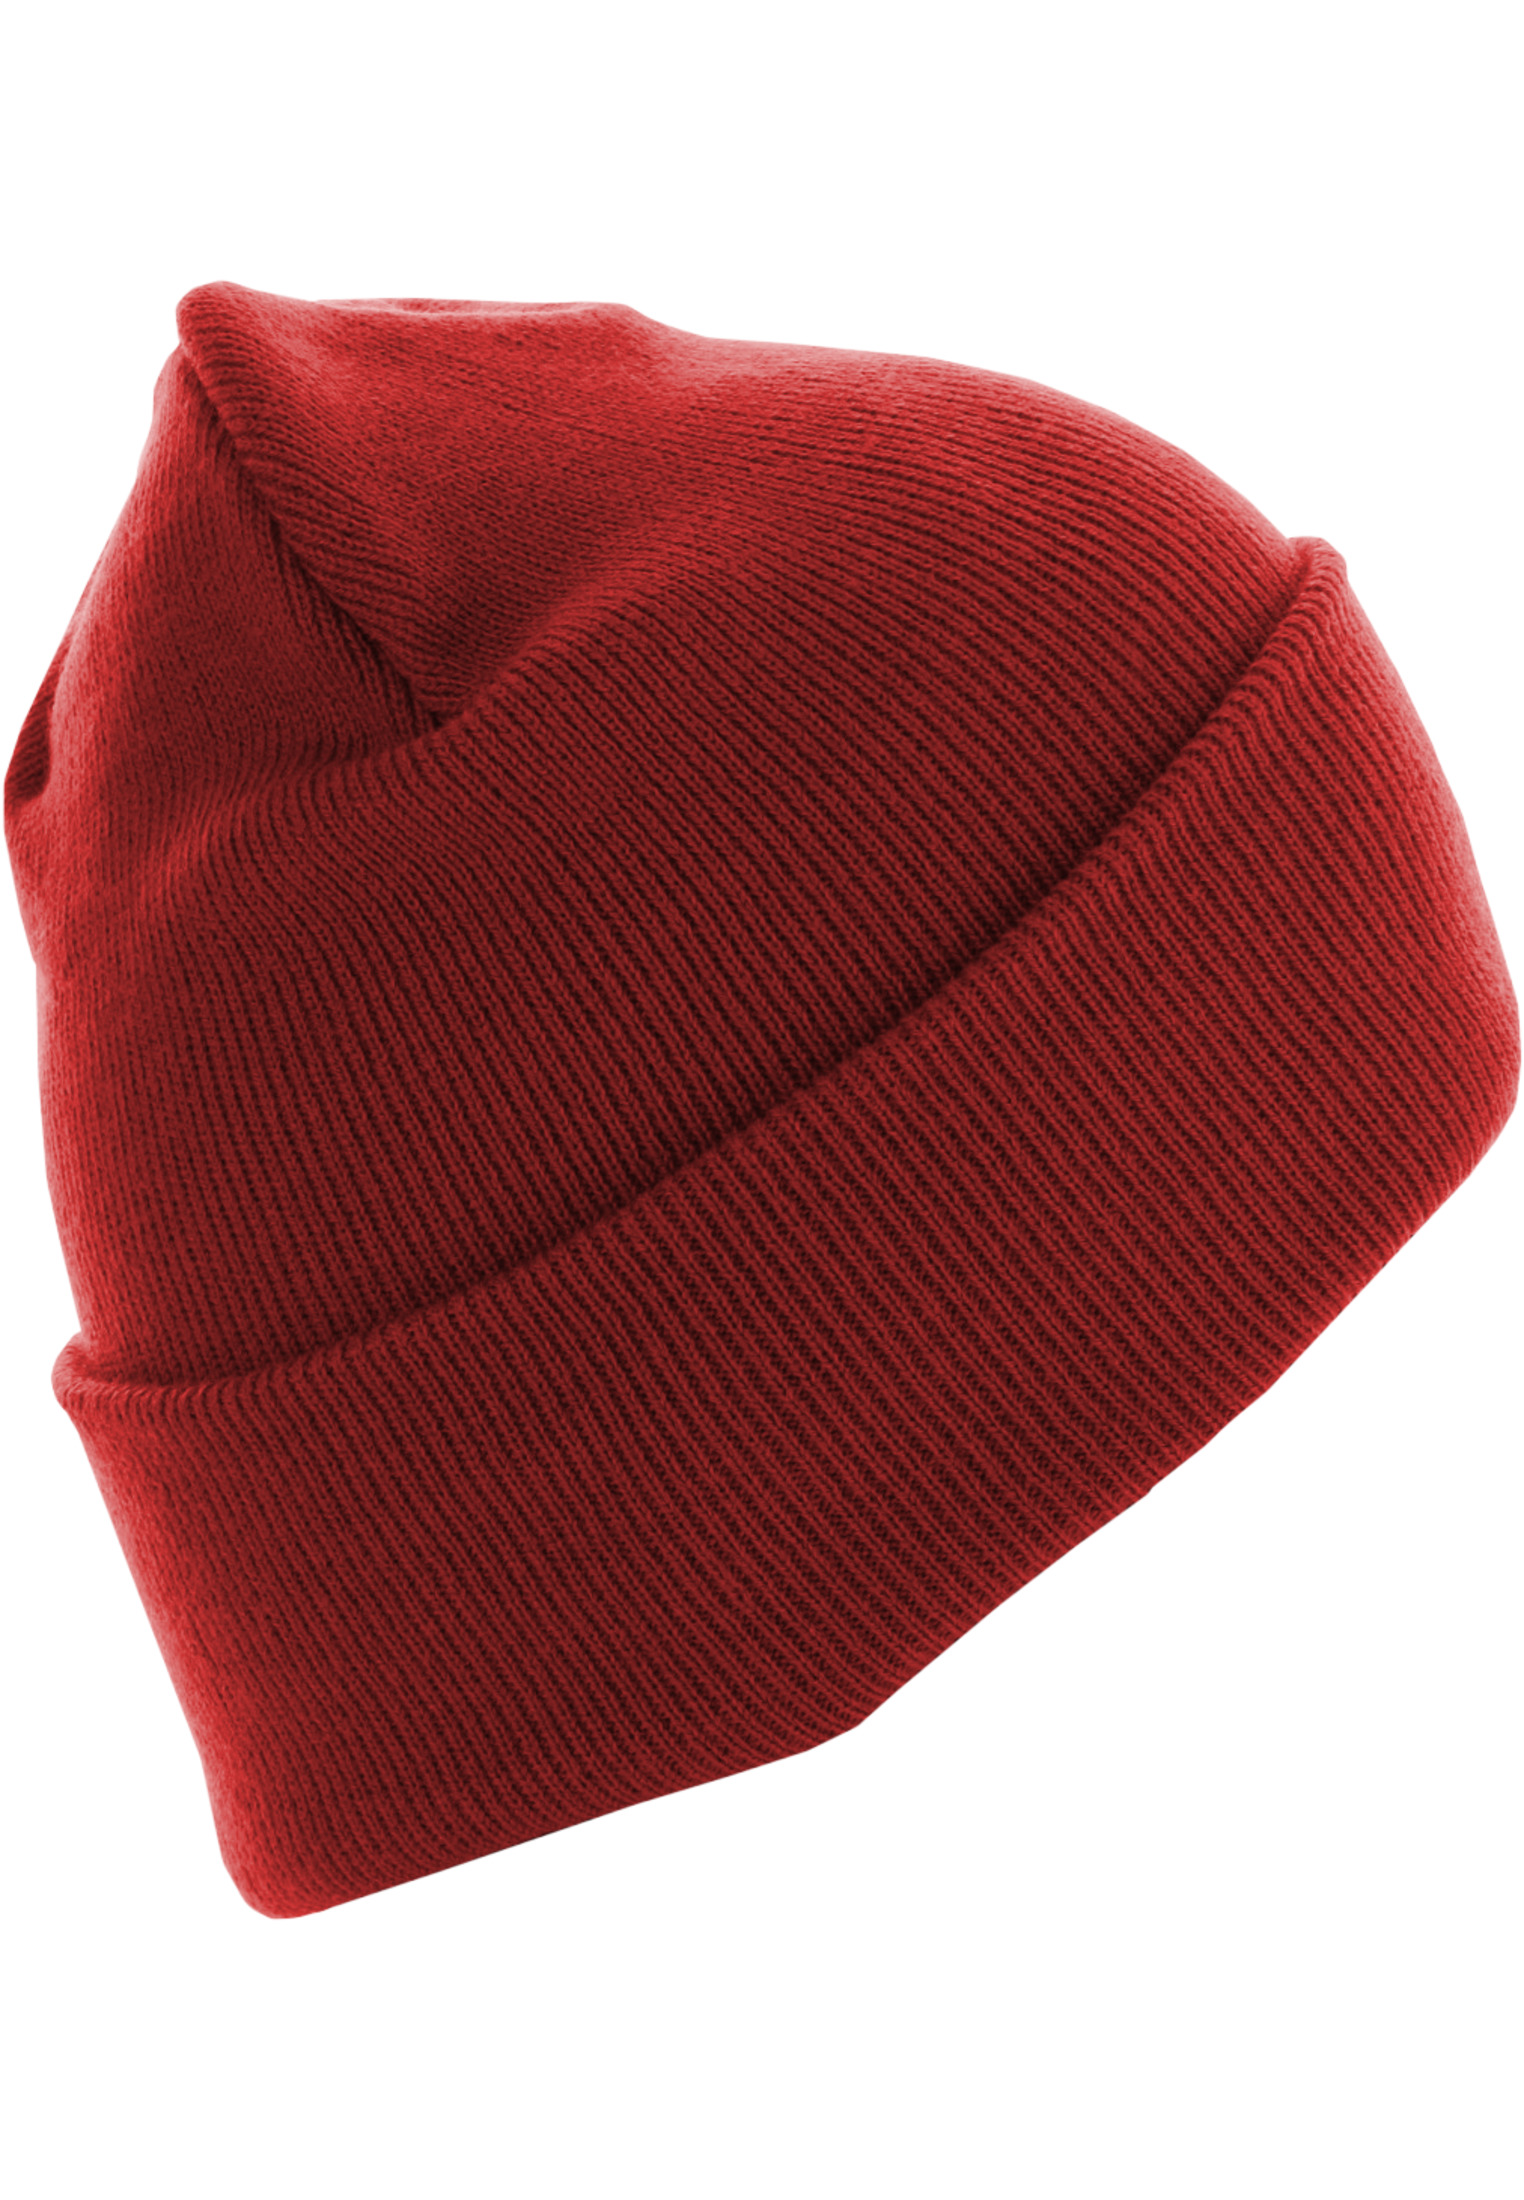 Caps & Beanies Beanie Basic Flap Long Version in Farbe red